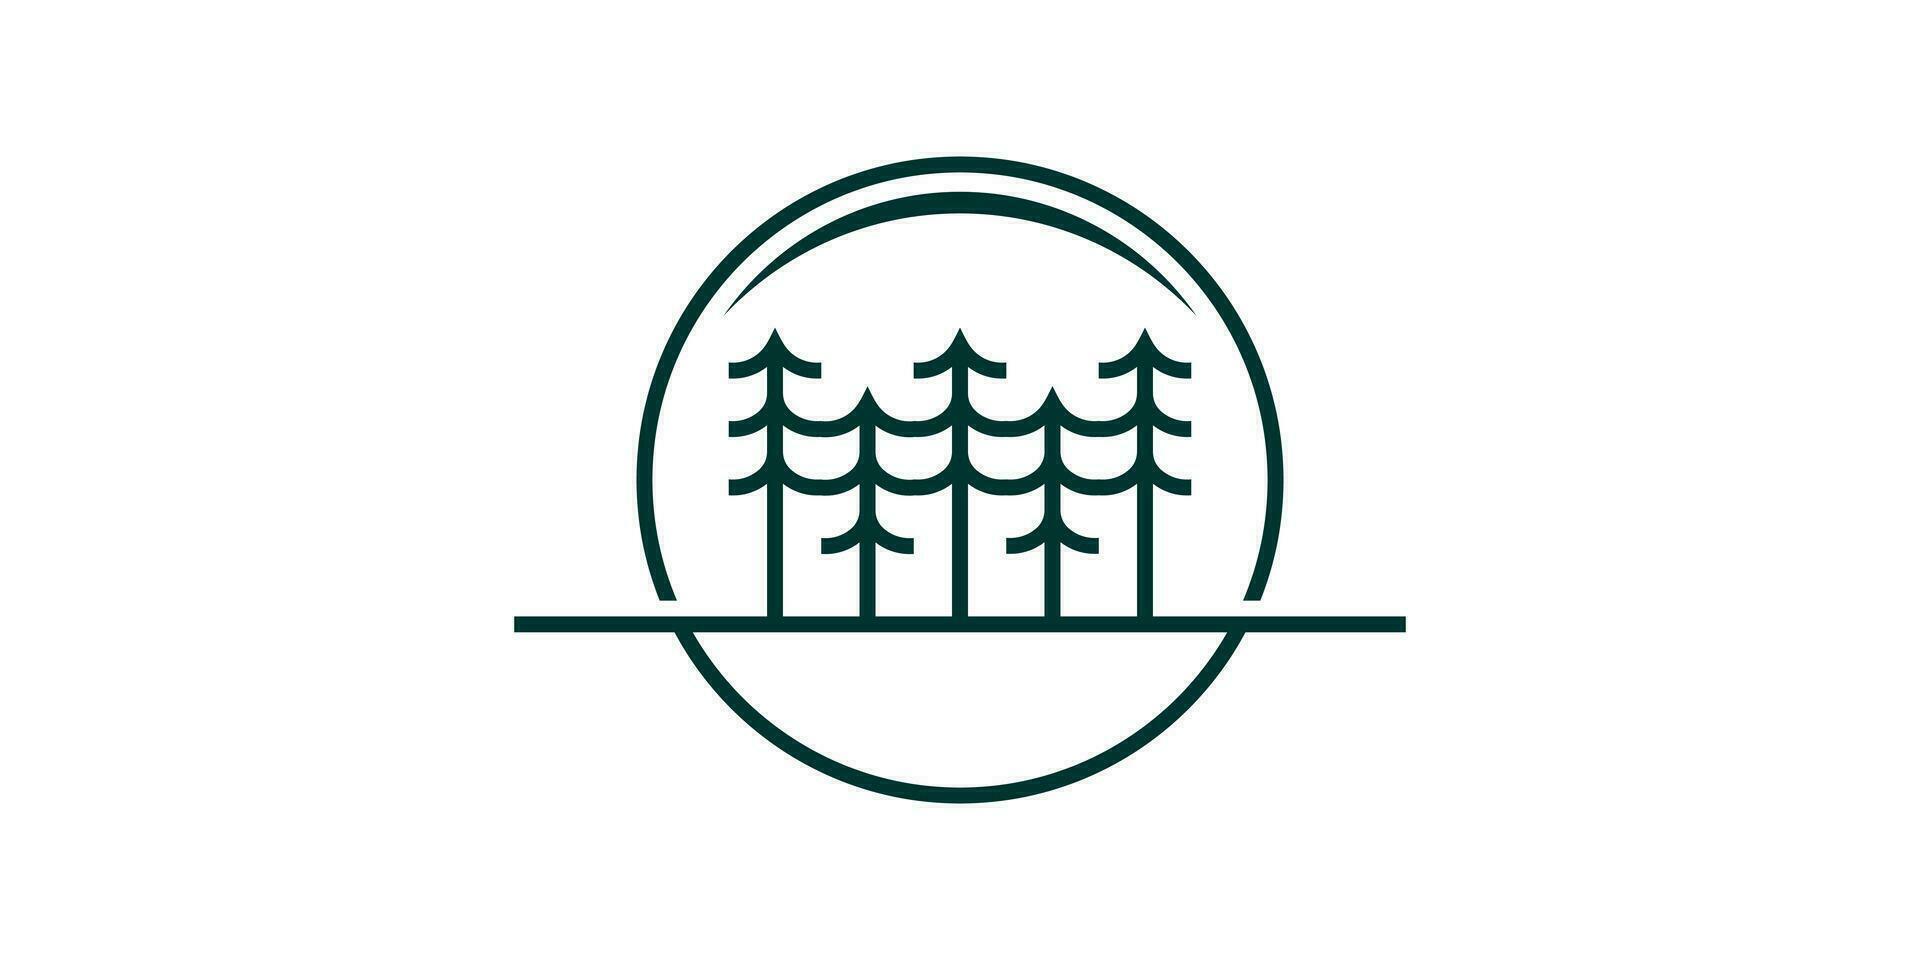 logo design combination of circle shapes with pine trees, forests, icons, vectors, symbols. vector